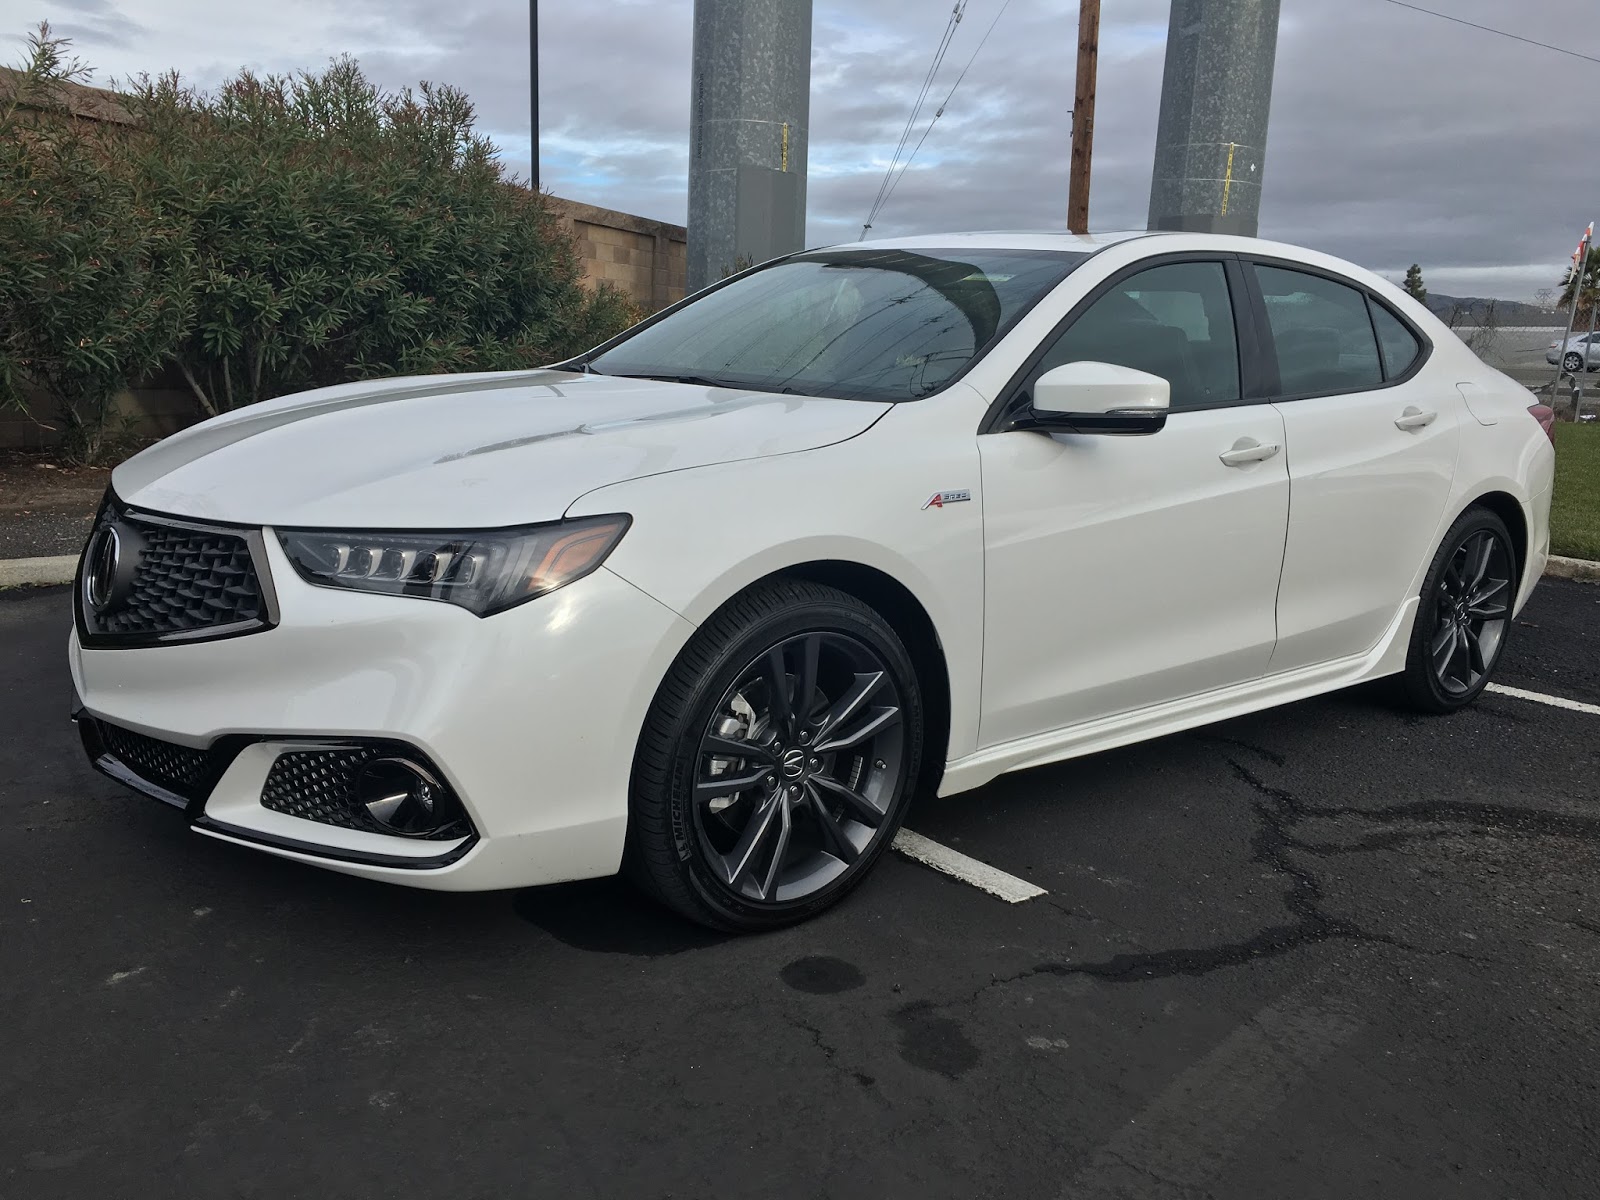 2018 Acura TLX A-Spec Review By Rob Eckaus